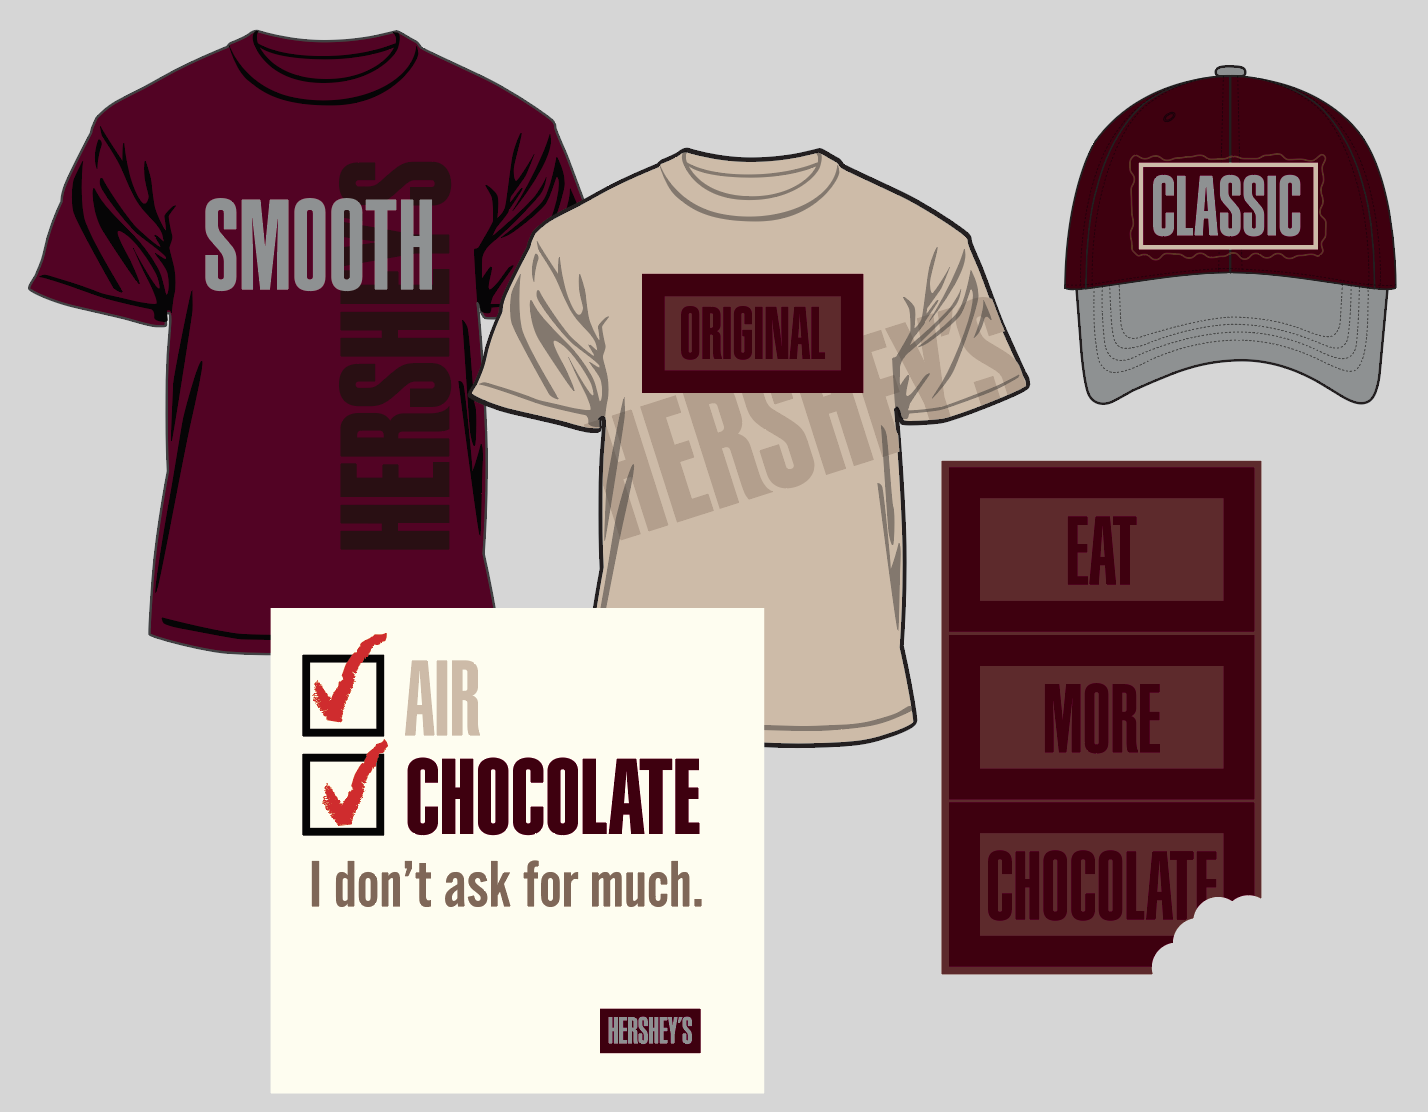 Hershey's Chocolate "Verbiage" collection